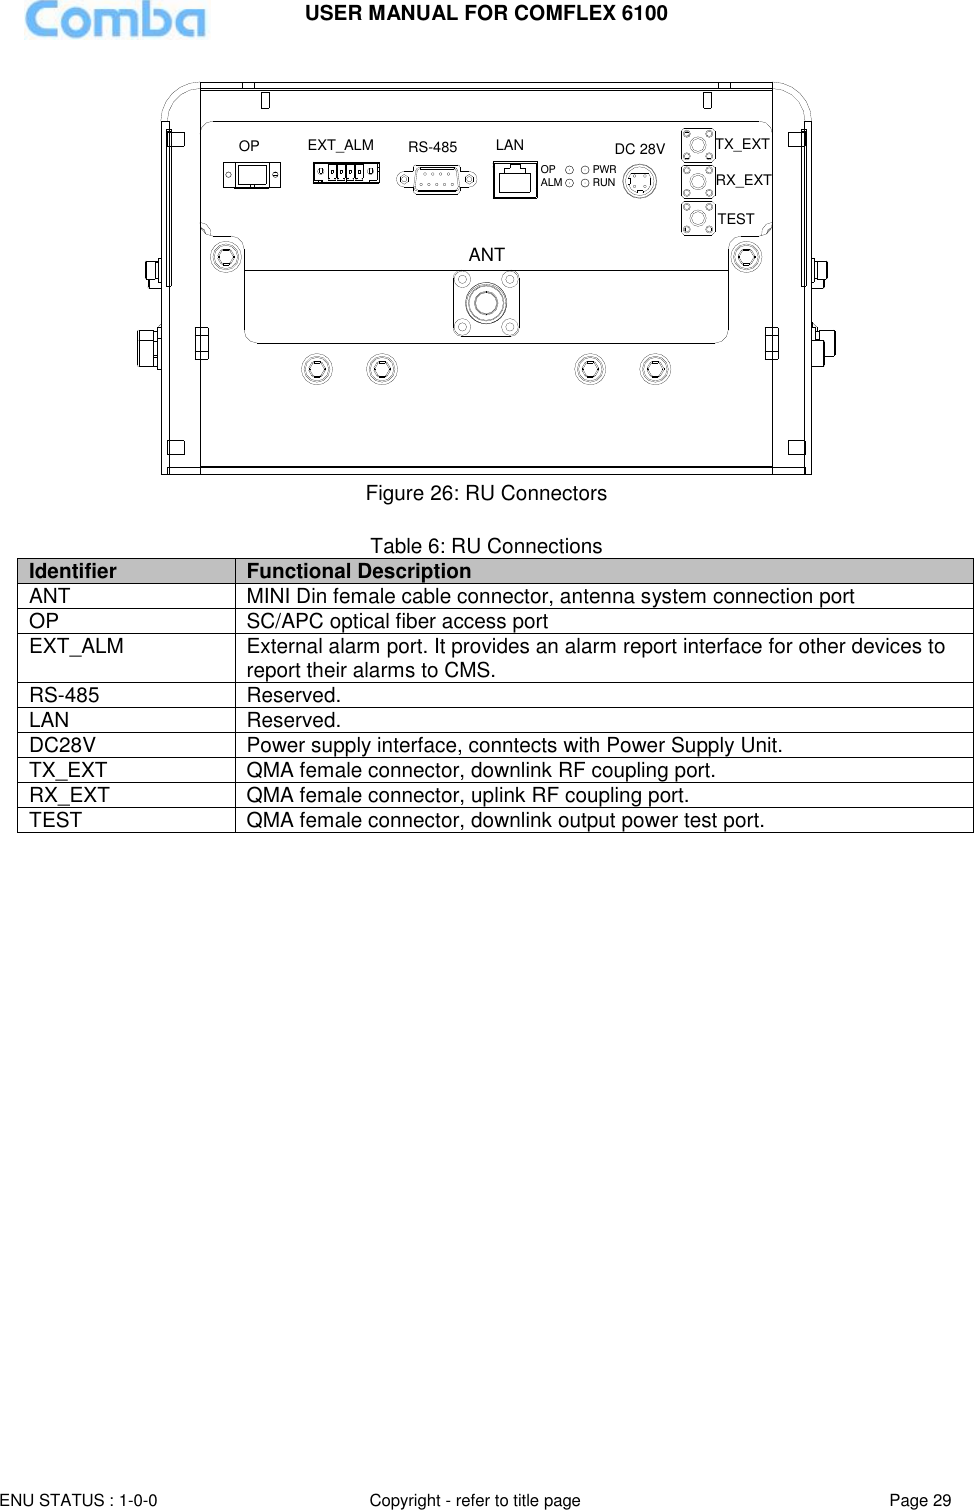 USER MANUAL FOR COMFLEX 6100 ENU STATUS : 1-0-0 Copyright - refer to title page Page 29  ANTRX_EXTTX_EXTTESTPWRRUNALMOPDC 28VLANRS-485EXT_ALMOP Figure 26: RU Connectors  Table 6: RU Connections Identifier Functional Description ANT MINI Din female cable connector, antenna system connection port OP  SC/APC optical fiber access port EXT_ALM External alarm port. It provides an alarm report interface for other devices to report their alarms to CMS.  RS-485 Reserved. LAN Reserved.  DC28V Power supply interface, conntects with Power Supply Unit. TX_EXT QMA female connector, downlink RF coupling port. RX_EXT QMA female connector, uplink RF coupling port. TEST QMA female connector, downlink output power test port. 